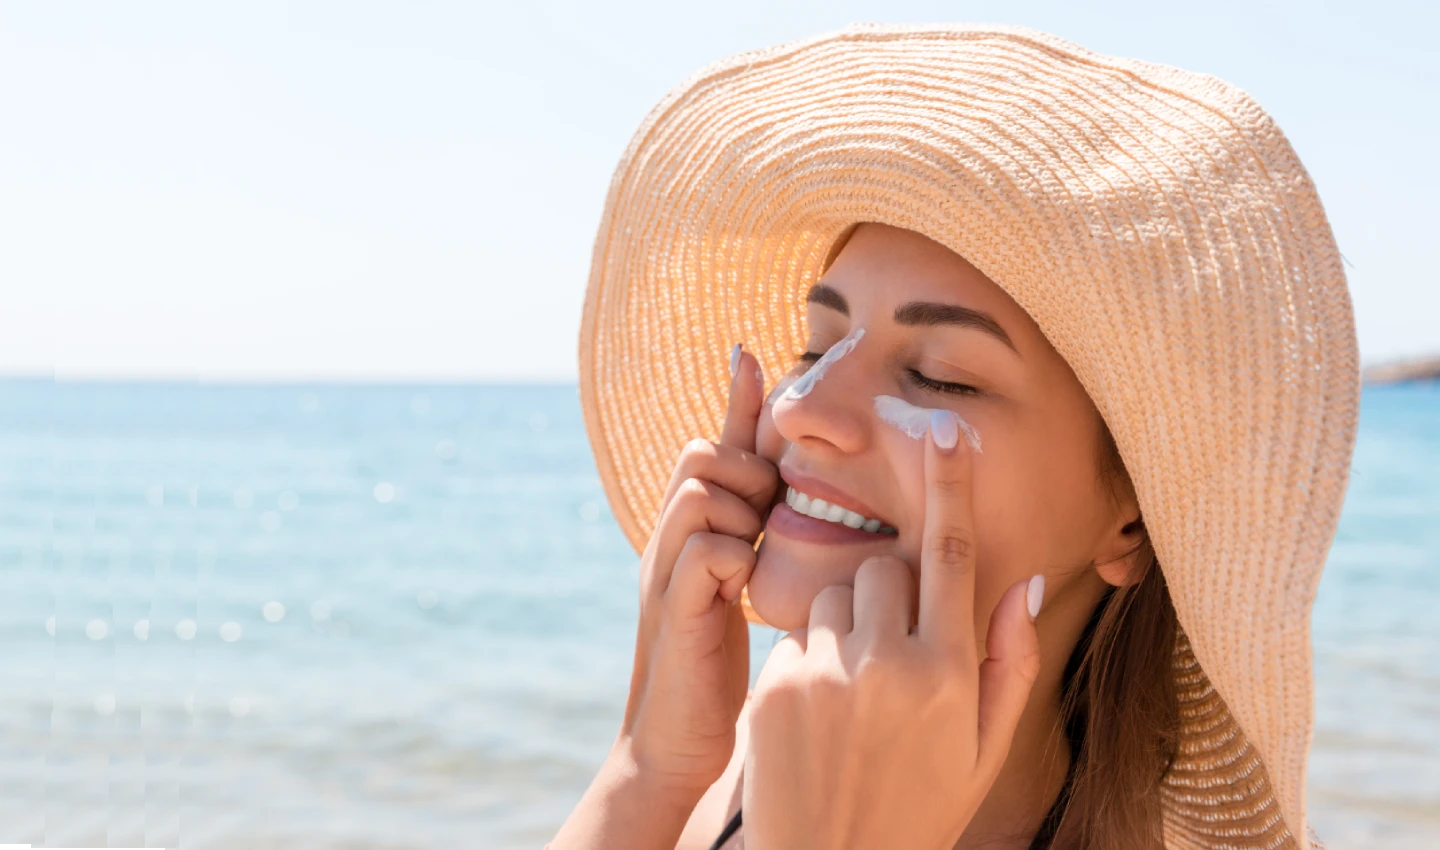 Woman putting sunscreen cream on her face at the beach. Highlighting the importance of Sun Protection Skincare for healthy skin.